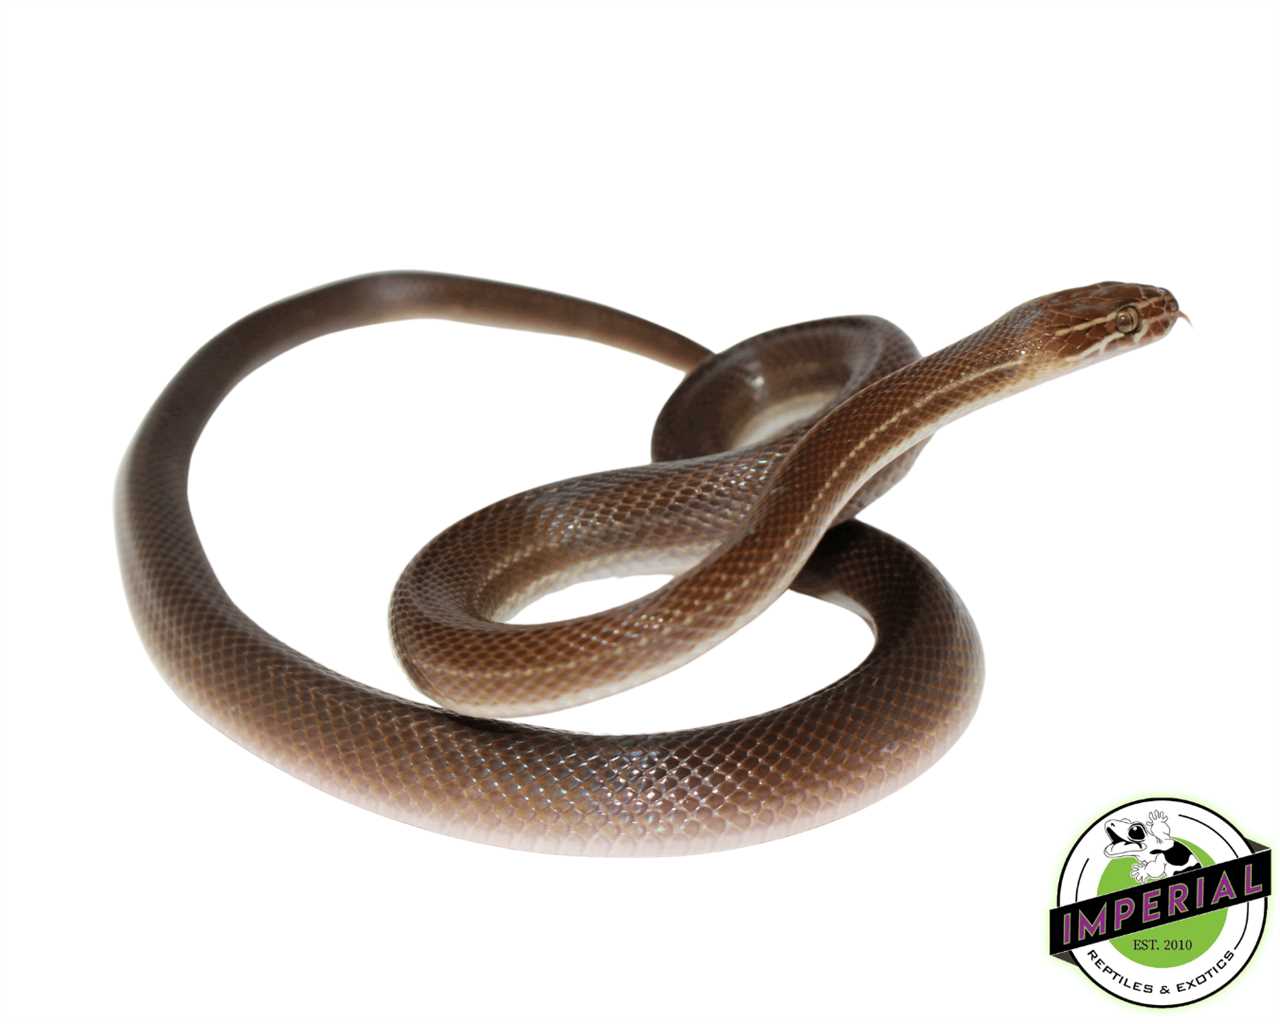 About African House Snake